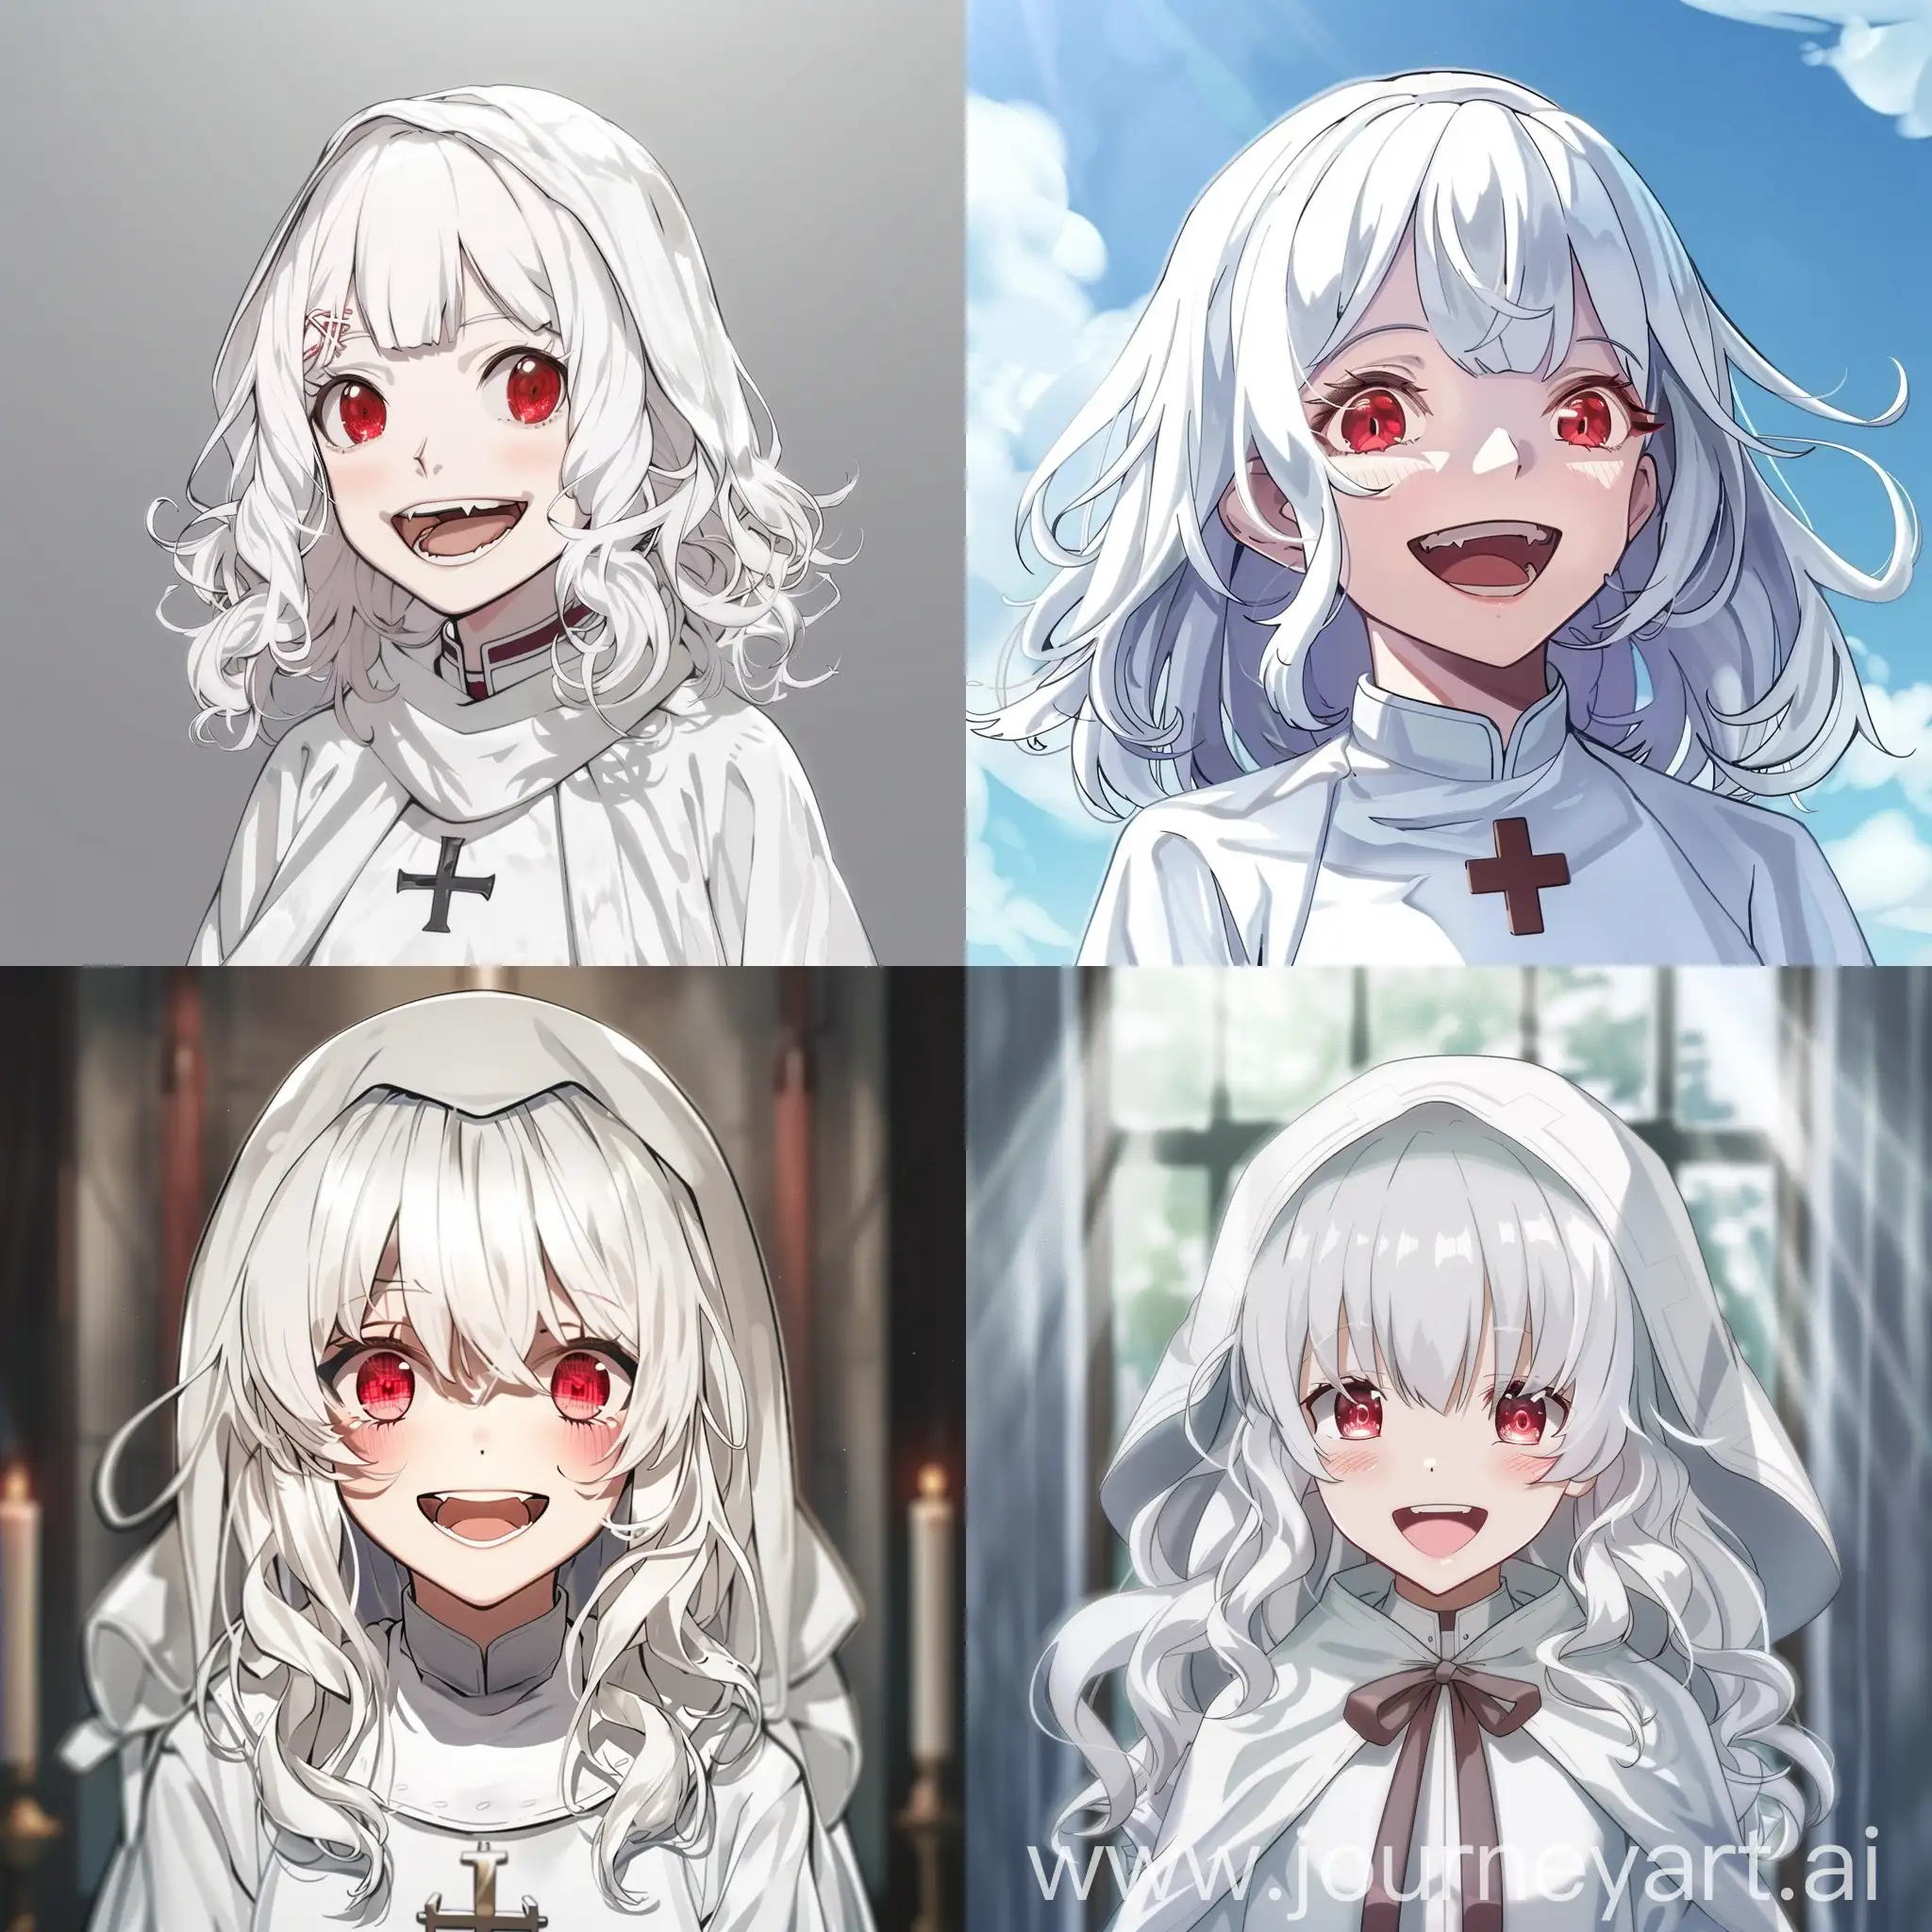 A smiling girl with white wavy hair and red eyes, in white priest clothes in anime style